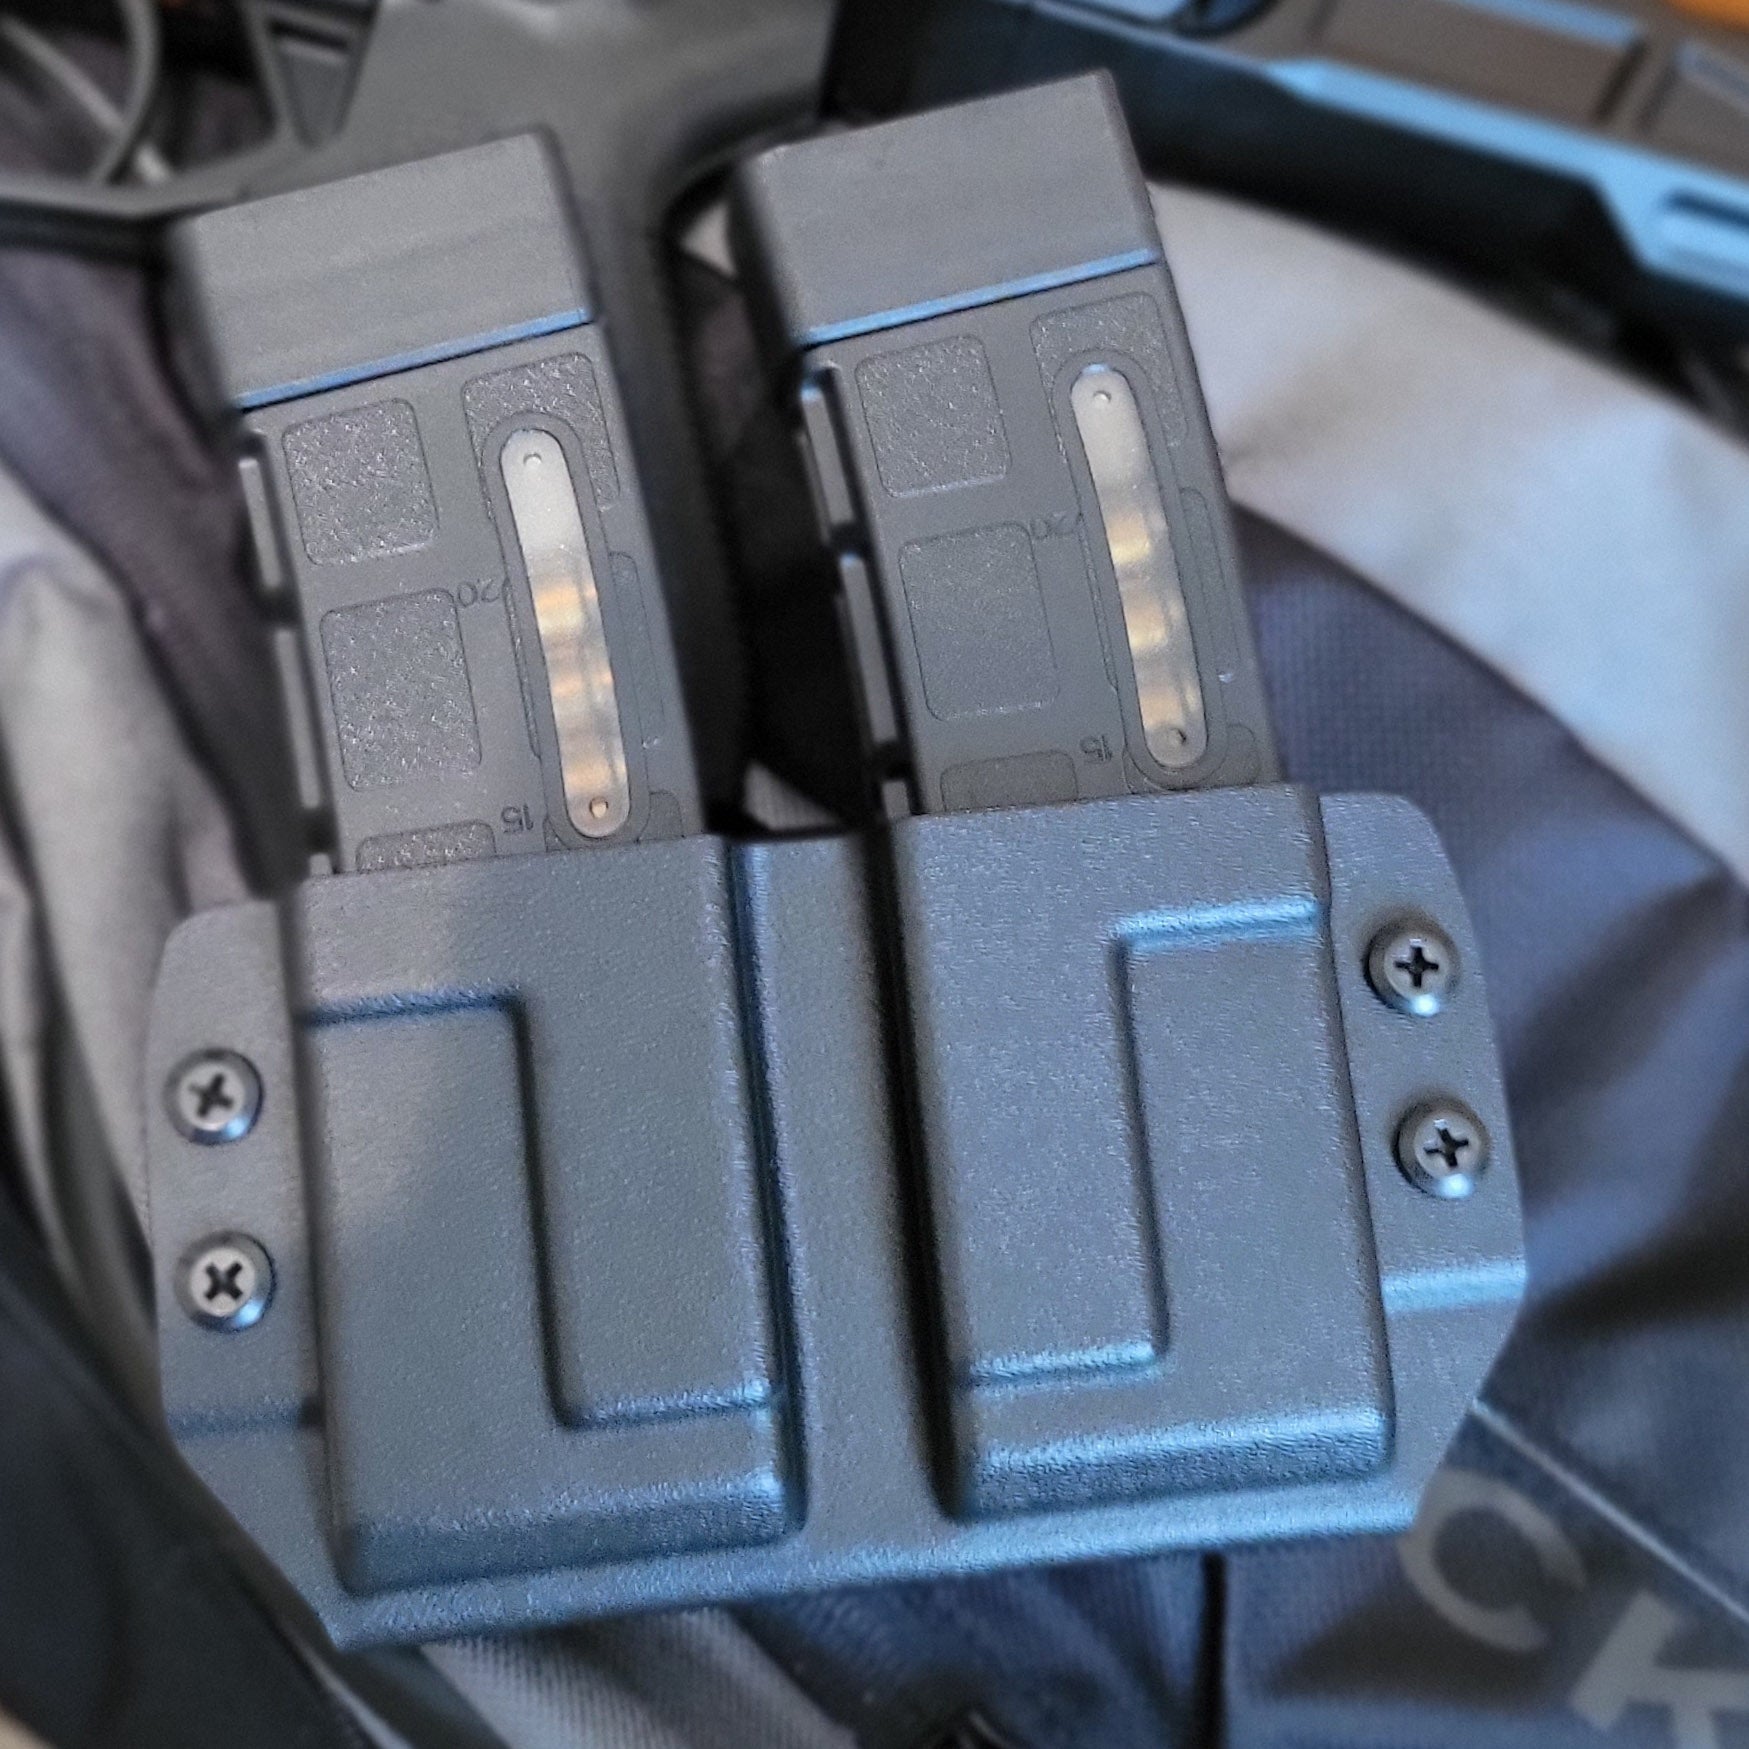 Our Outside Waistband CZ Scorpion Dual Magazine Holster is vacuum formed with a precision machined mold designed from CAD models of the actual firearm magazines. Each holster is formed, trimmed, and folded in-house. The magazine pouch retention is adjustable with an1/8" Allen wrench.